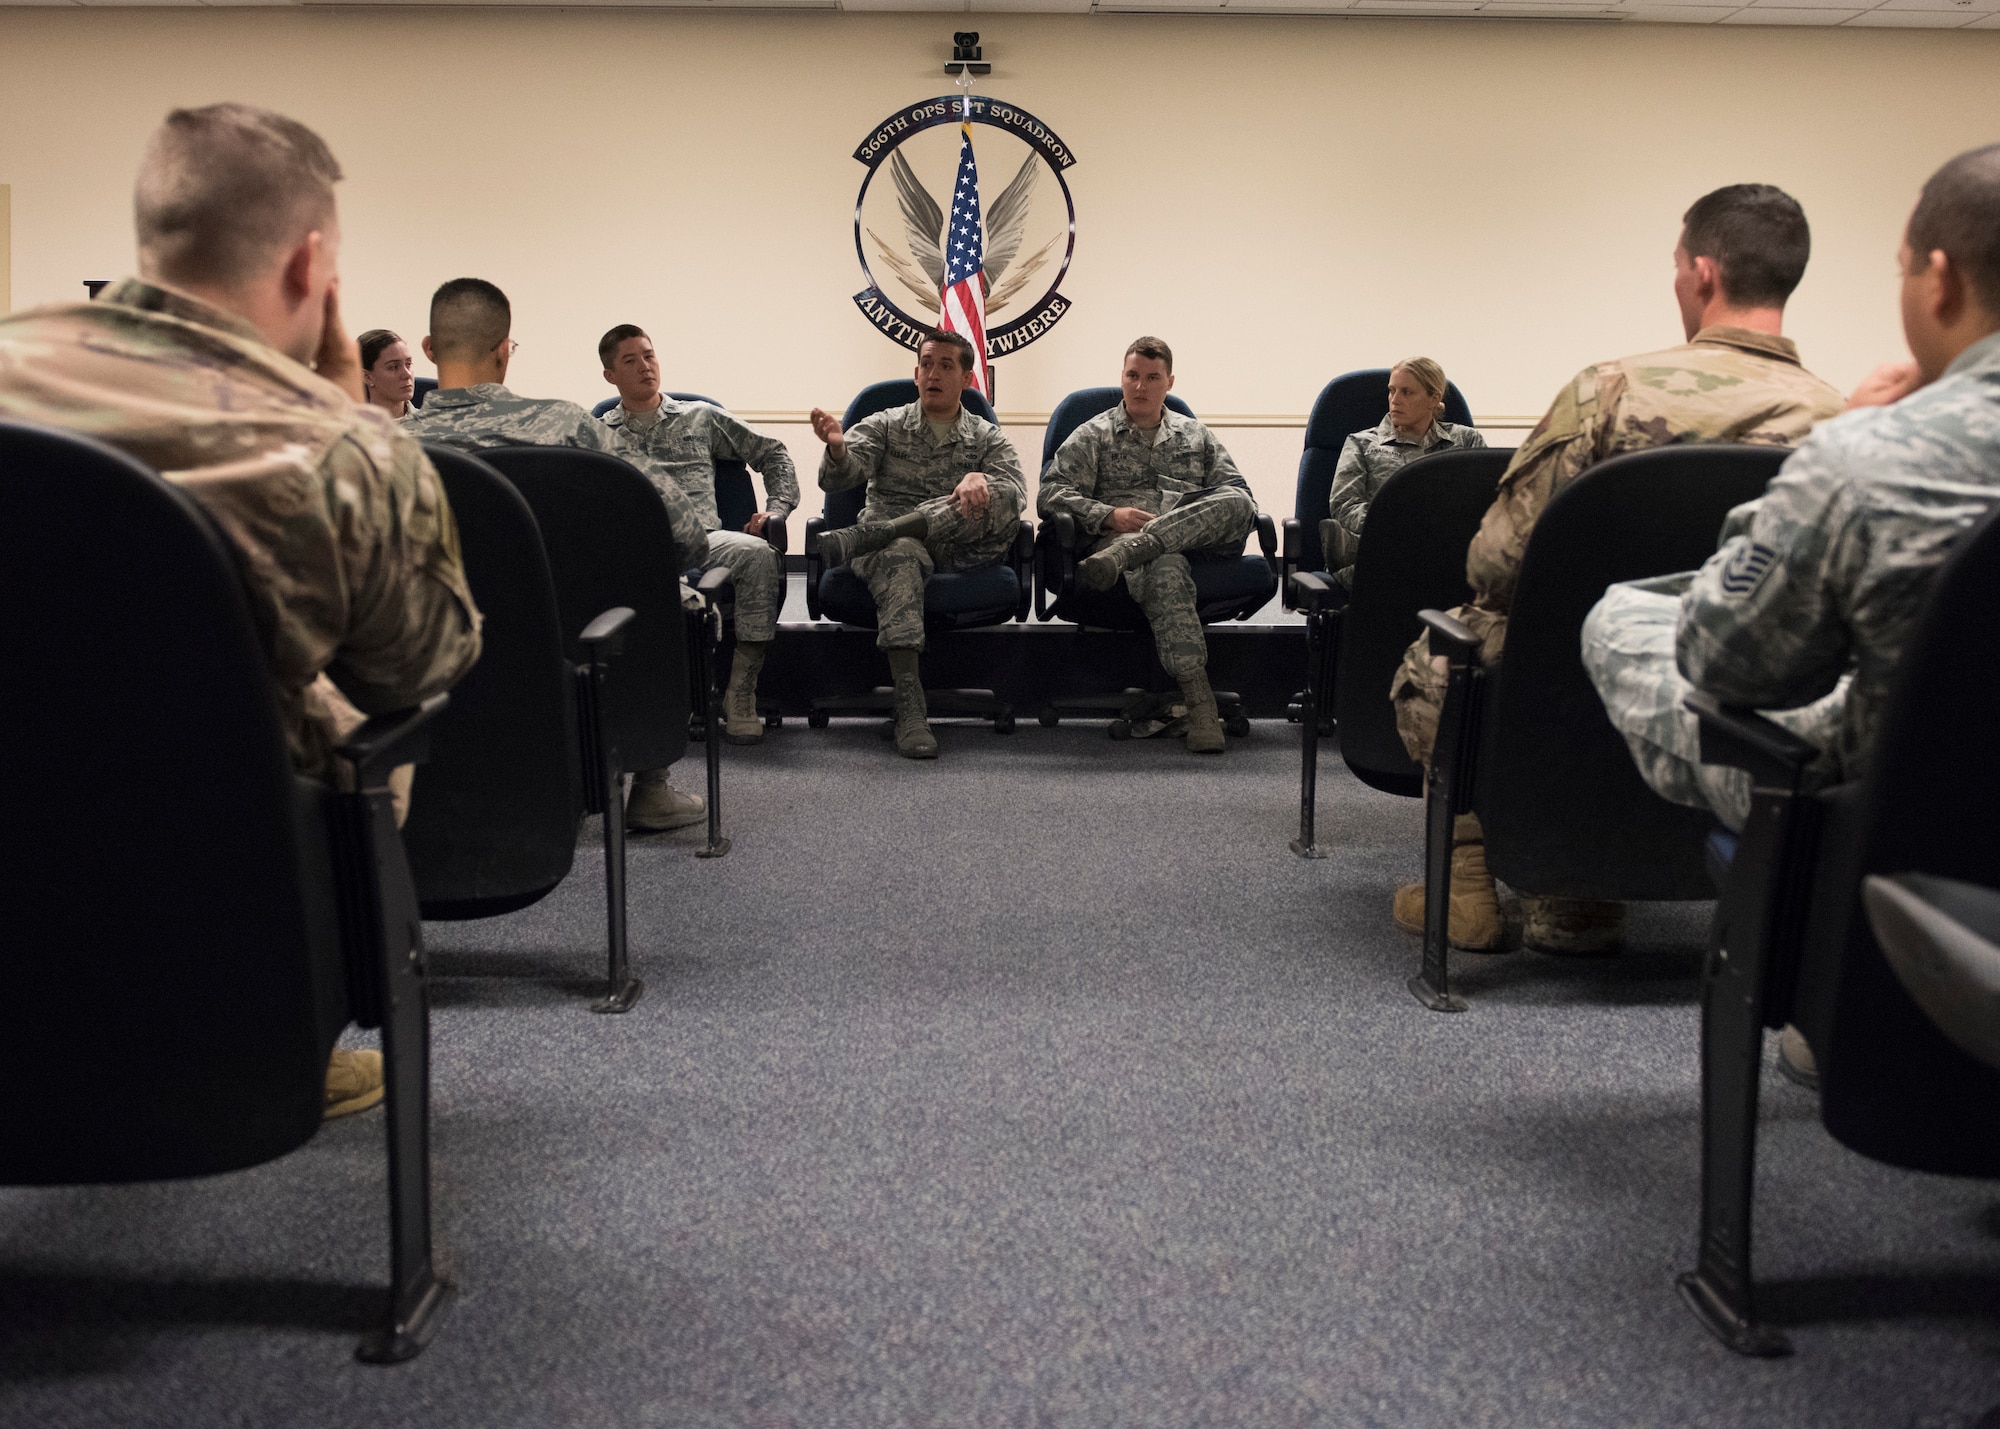 U.S. Air Force officers answer questions from enlisted Airmen August 27, 2019 on Mountain Home Air Force Base, Idaho. Officers hold commissioning panels for enlisted Airmen who have questions about the commissioning process. (U.S. Air Force photo by Airman Natalie Rubenak)